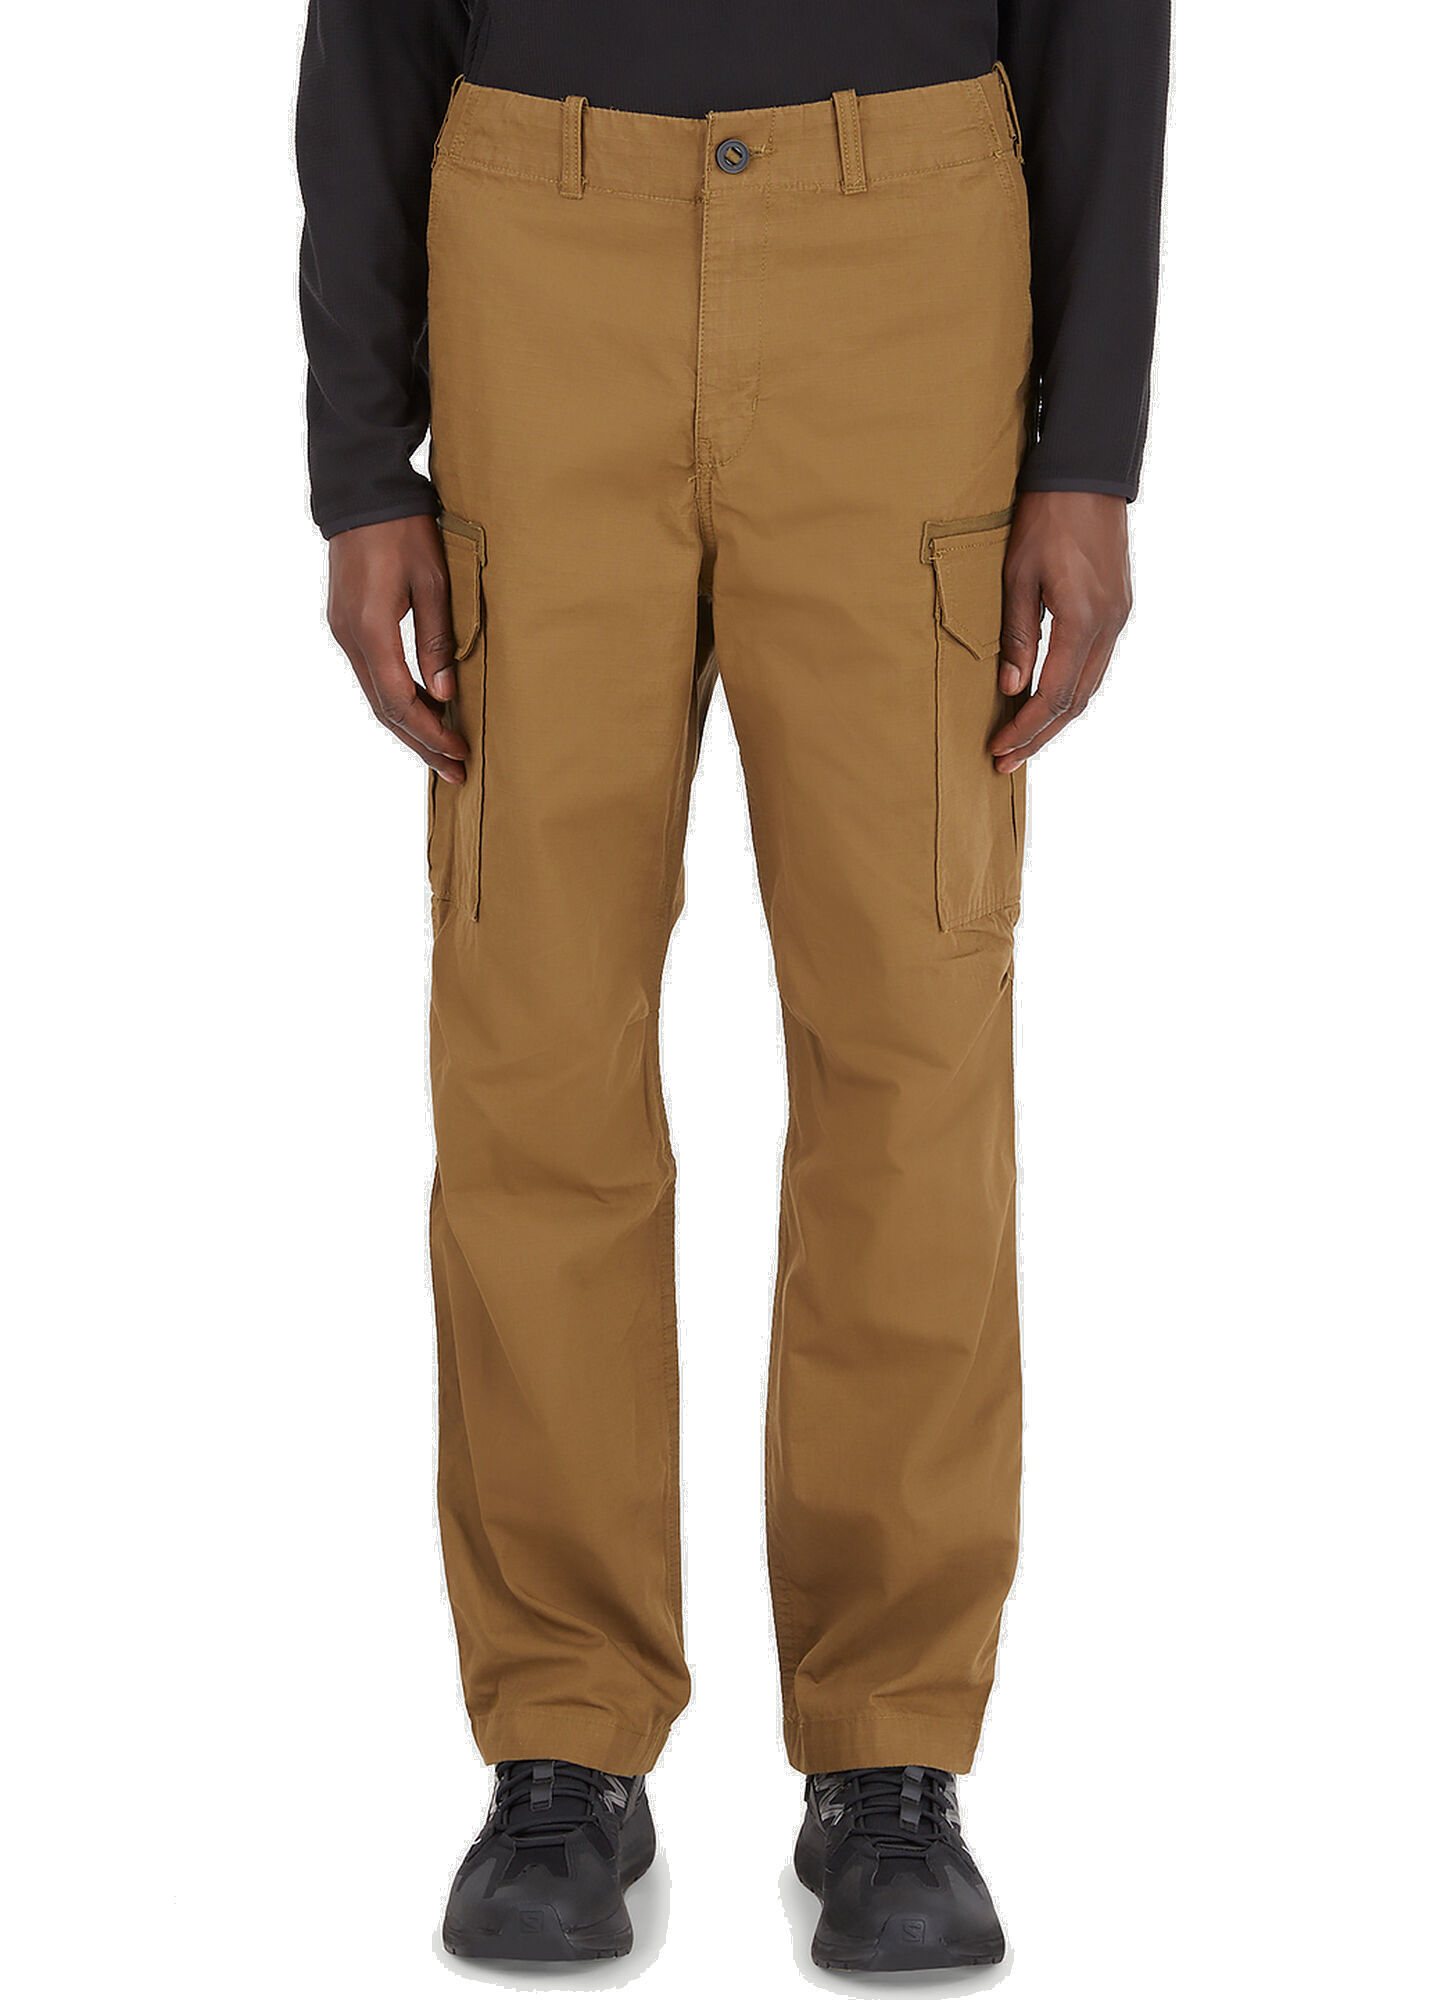 M66 Cargo Pants in Brown The North Face